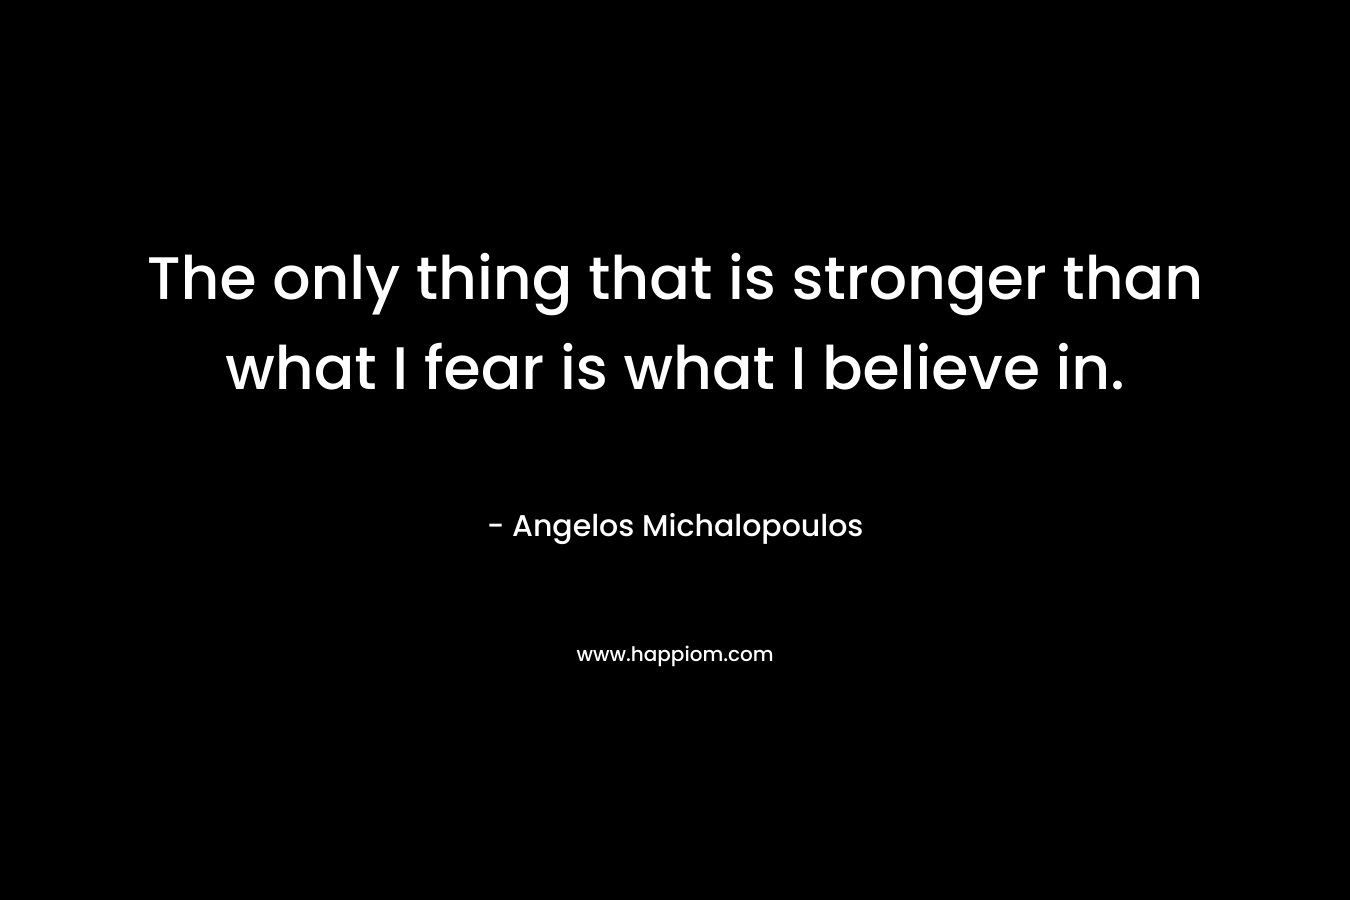 The only thing that is stronger than what I fear is what I believe in.